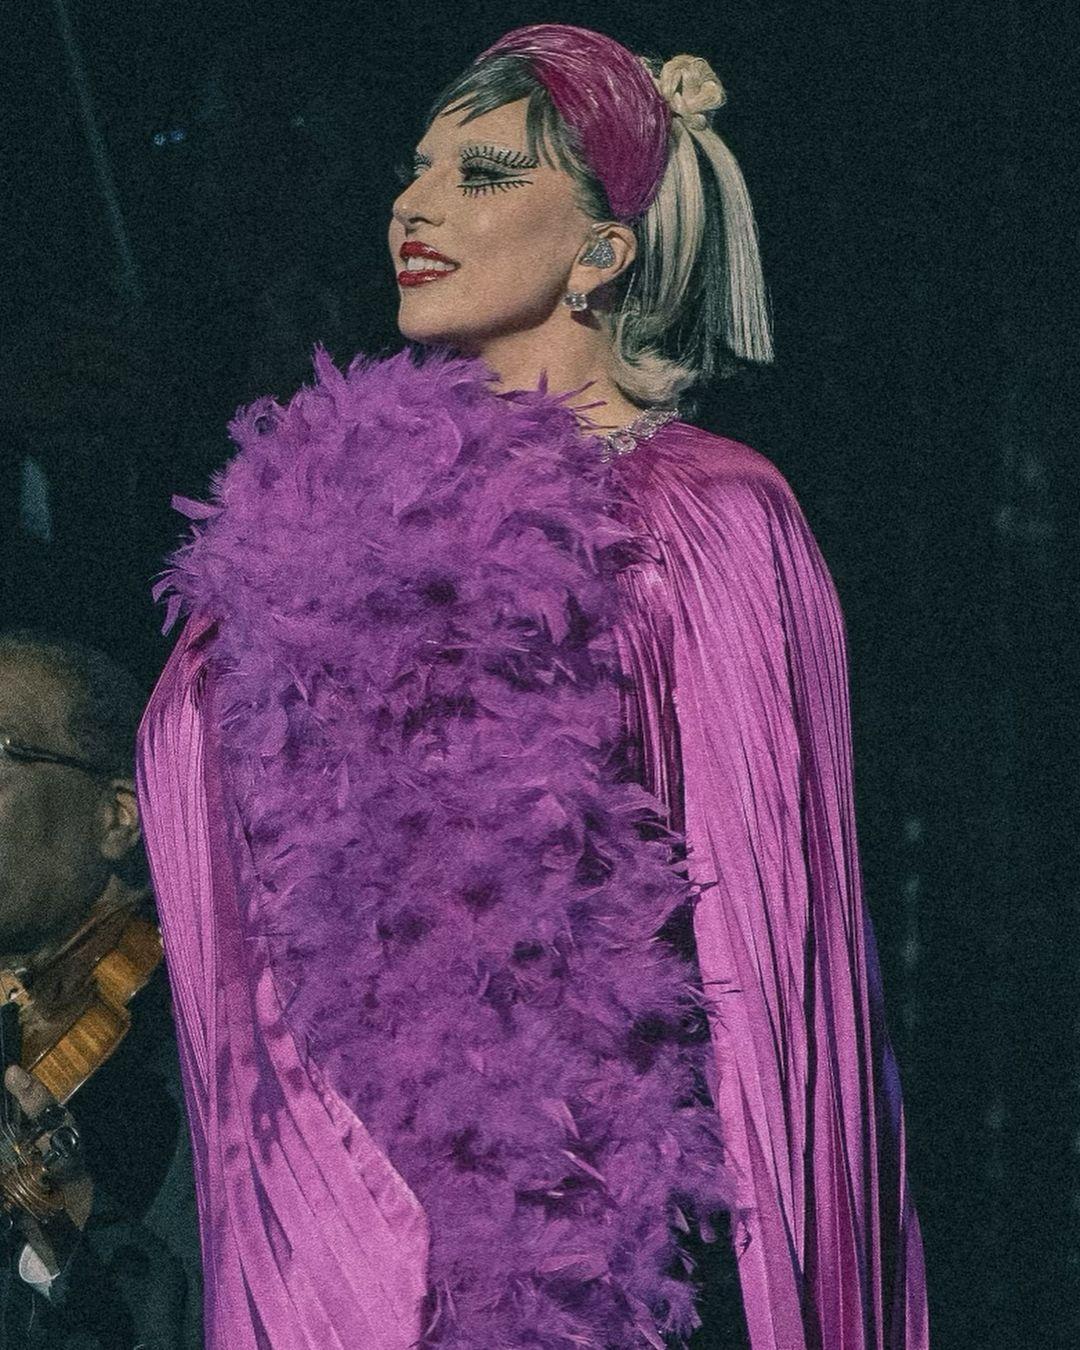 In another jaw-dropping picture, Lady Gaga sported a stunning pink/purple gown adorned with numerous feathers.